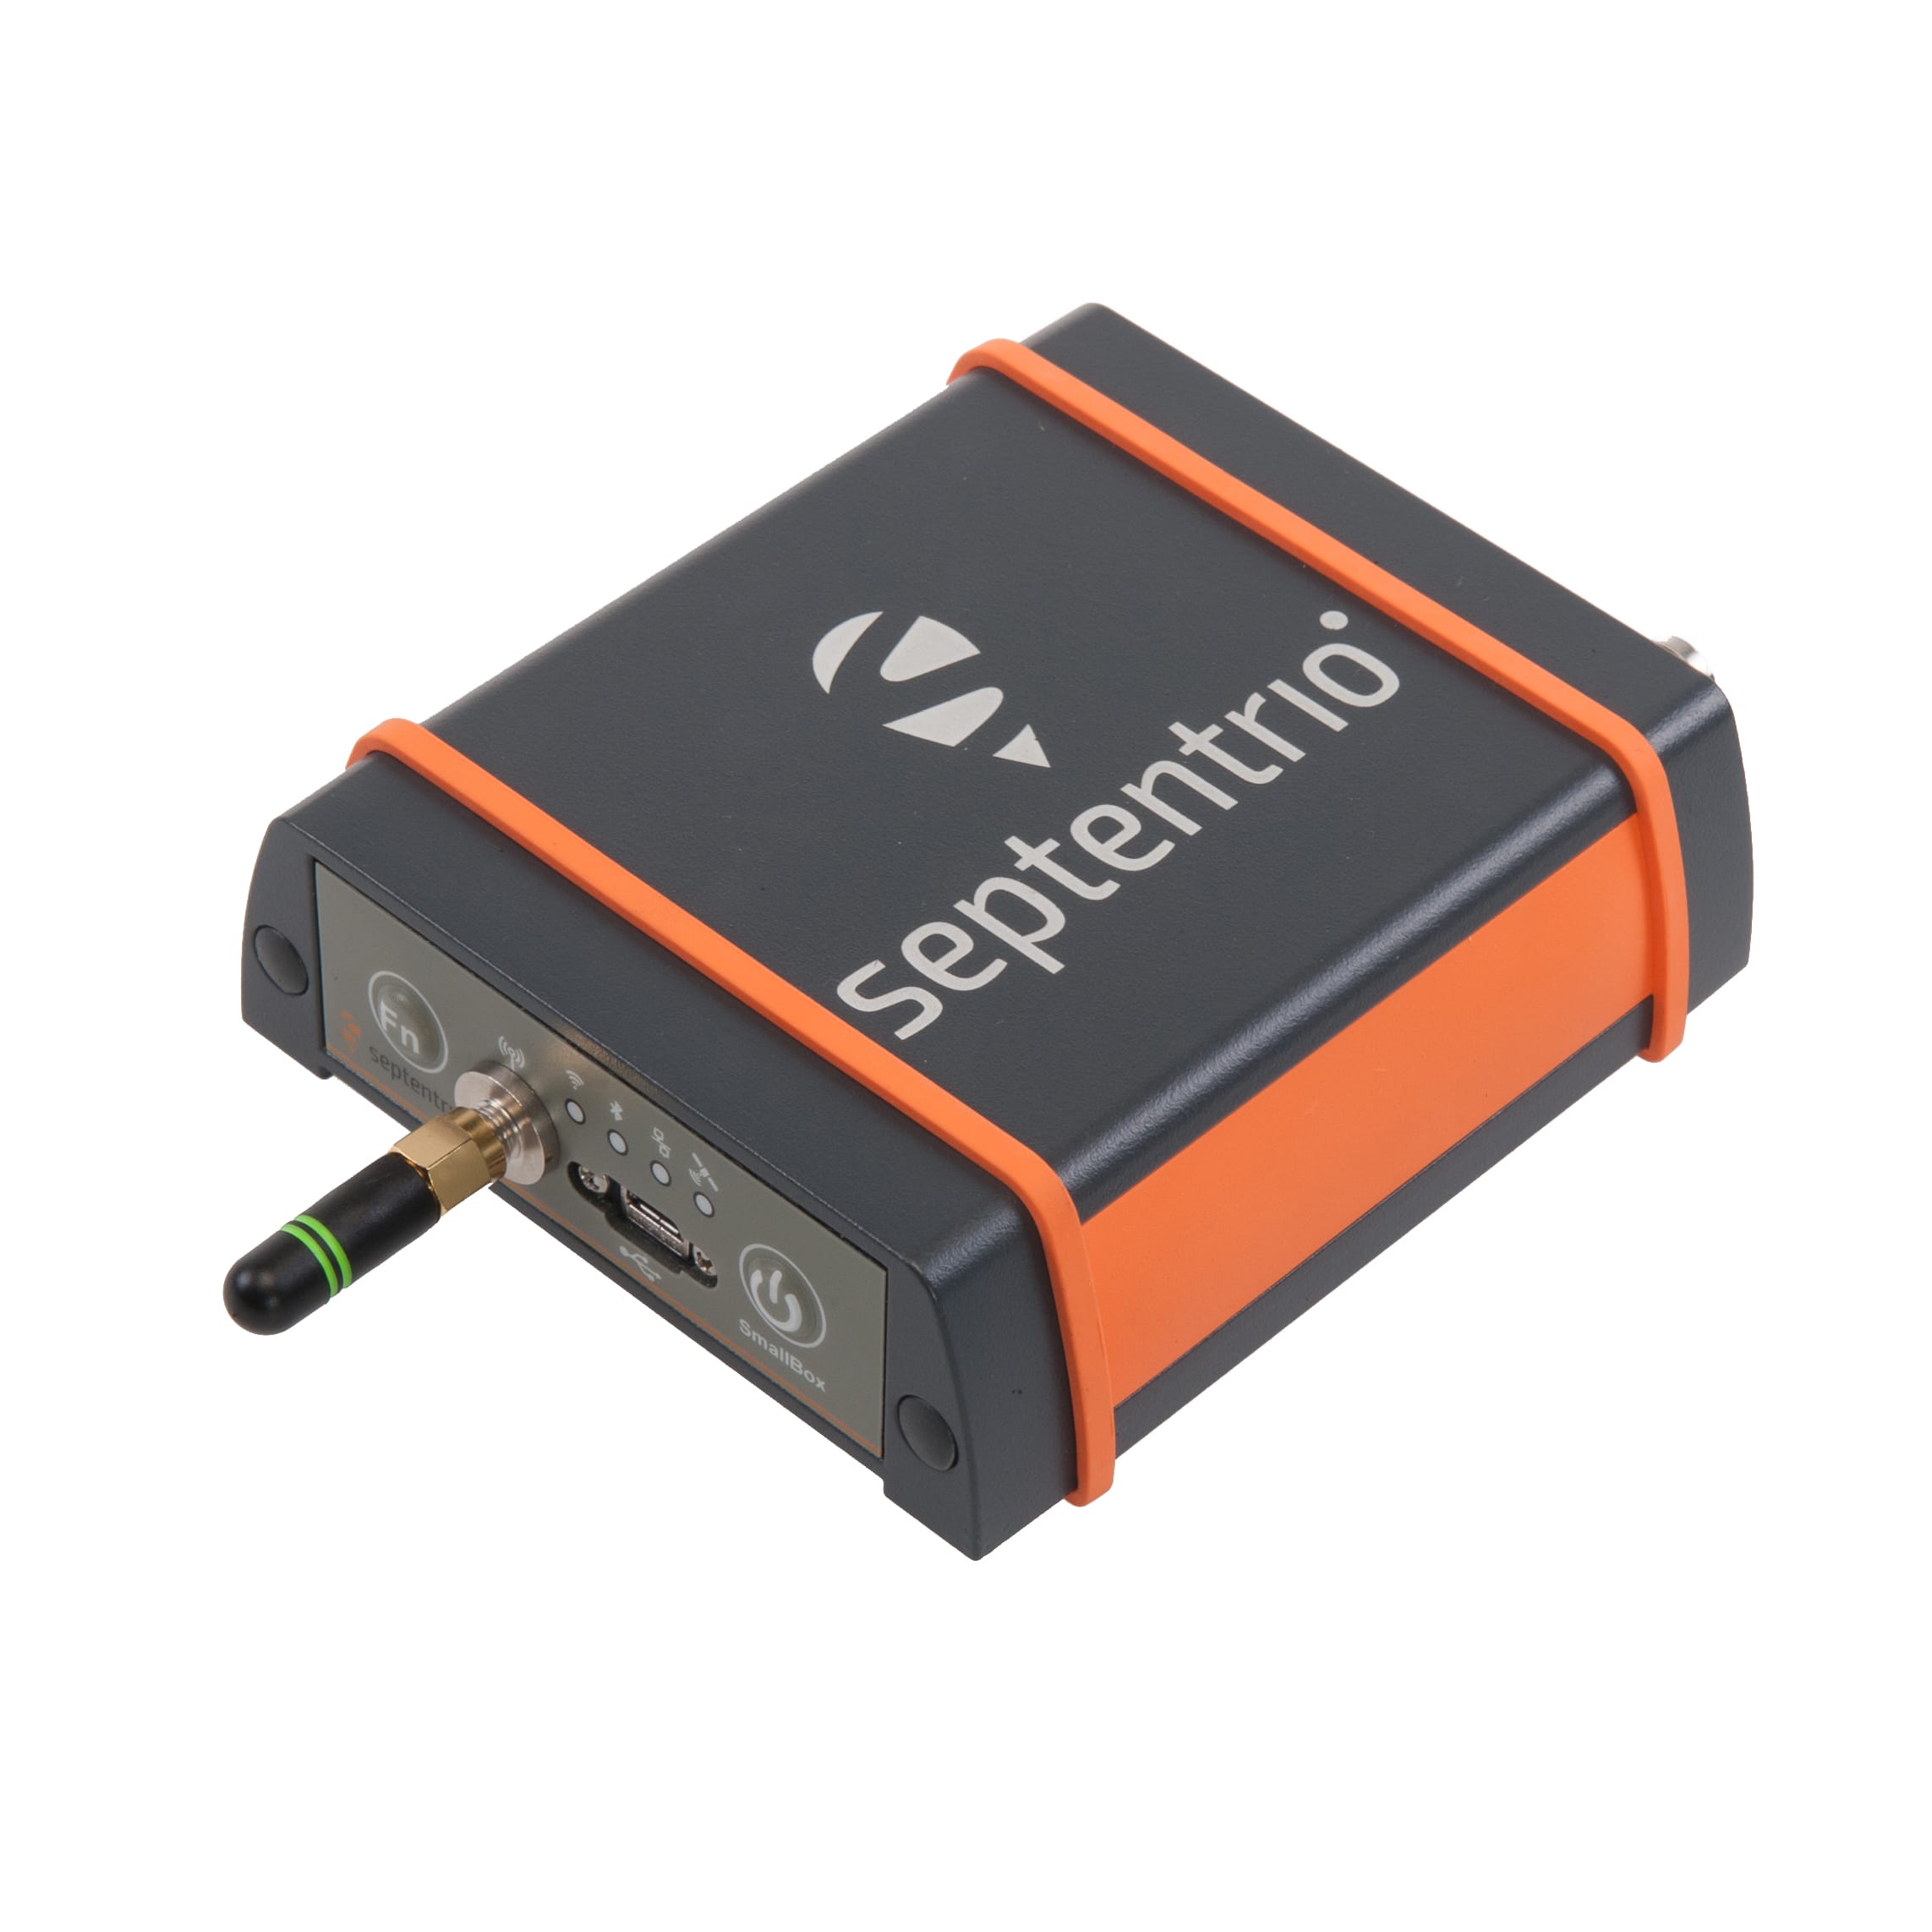 Septentrio Releases AsteRx SB, a Compact and Ruggedized GNSS Receiver